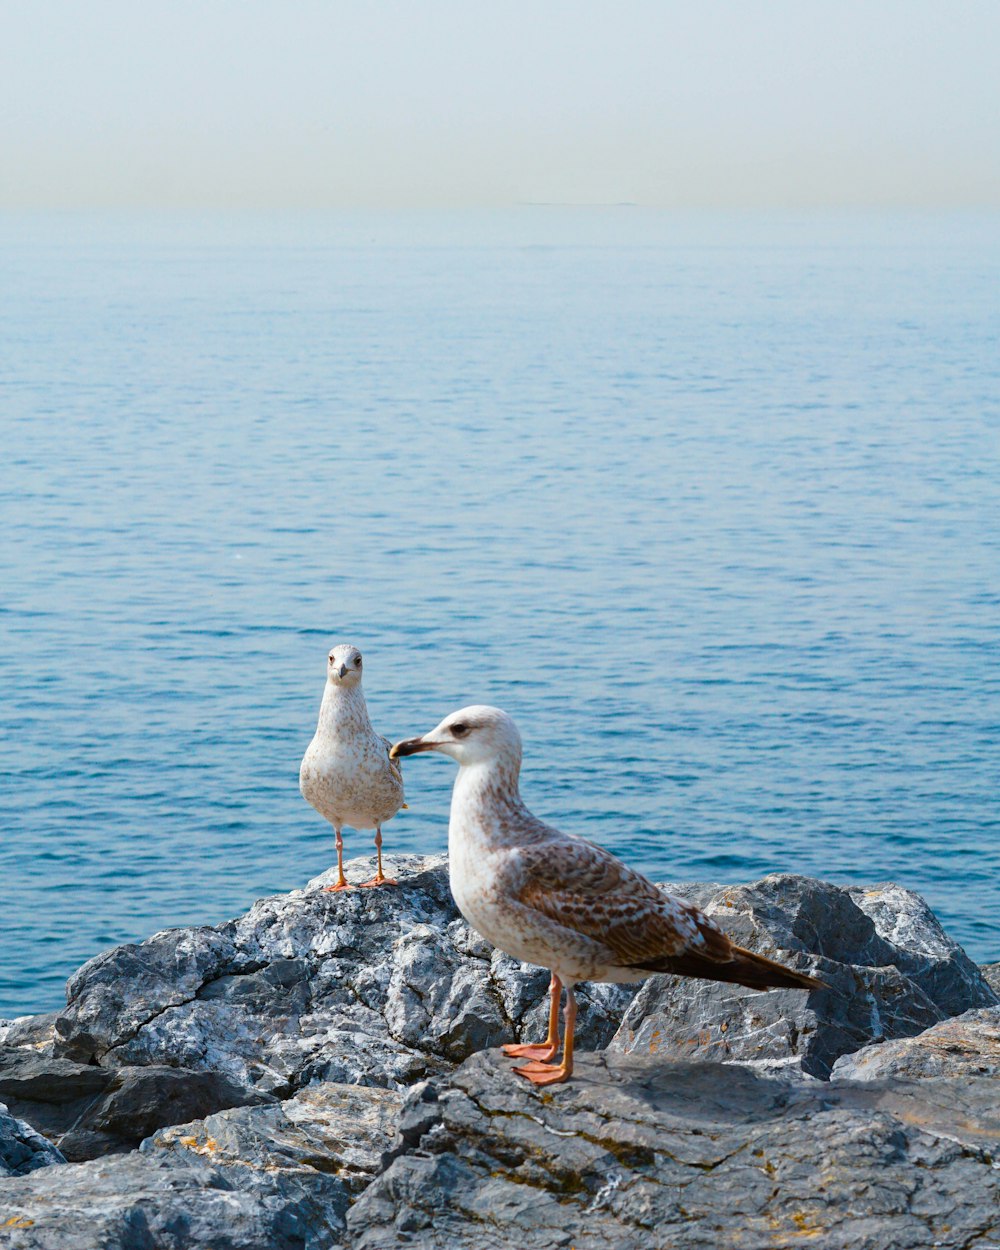 two seagulls are standing on a rock by the water